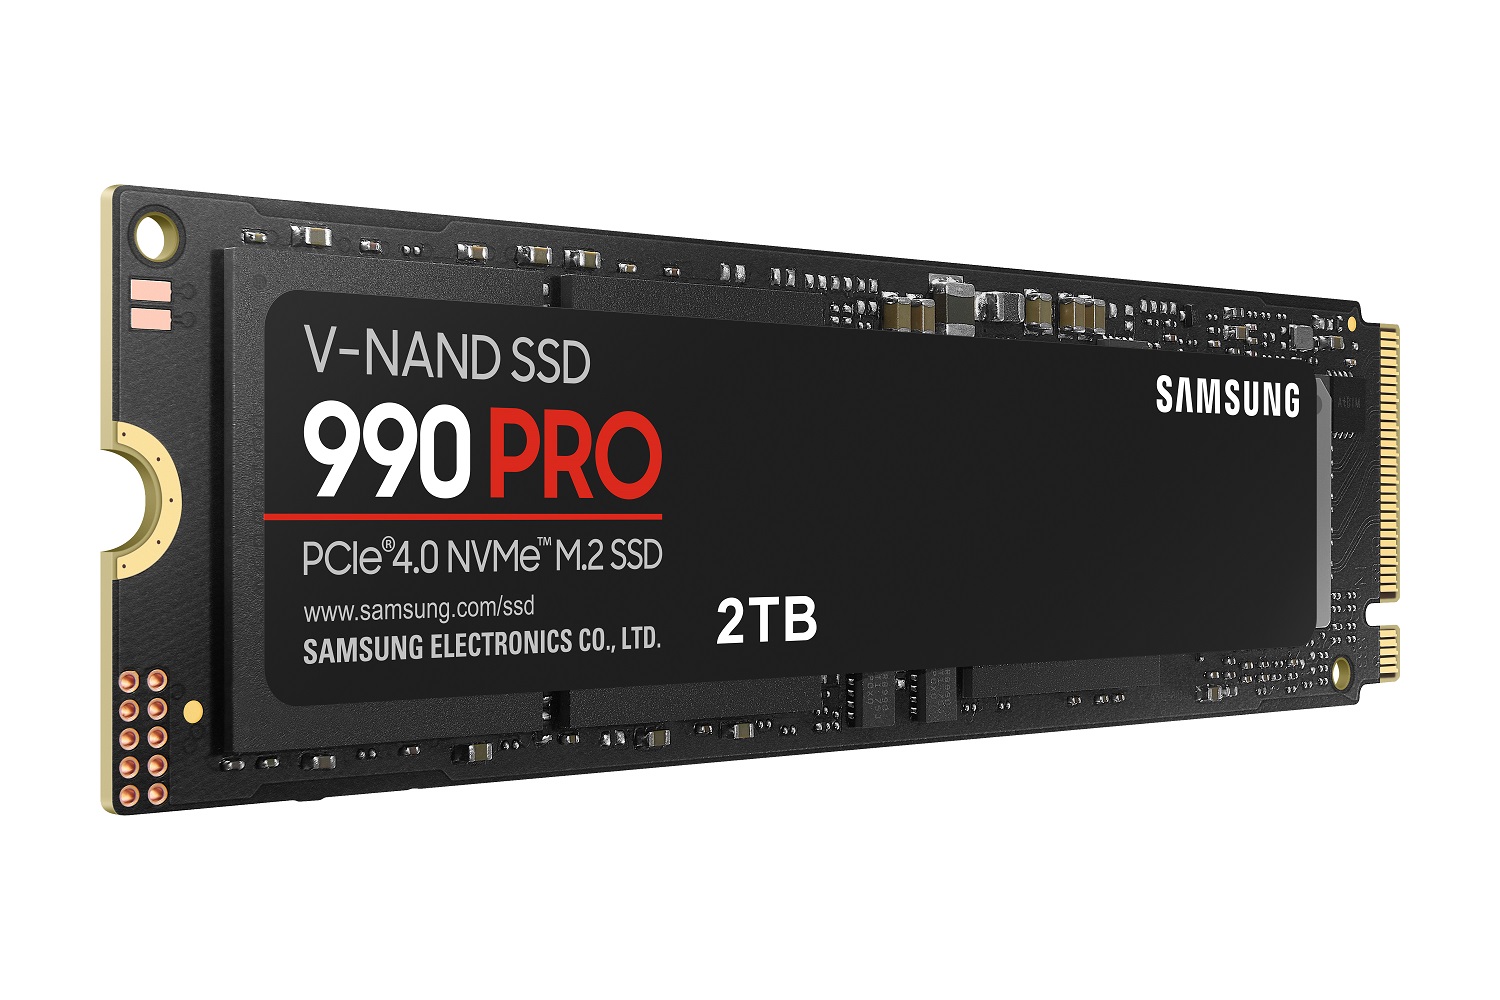 The front of the Samsung 990 Pro SSD.